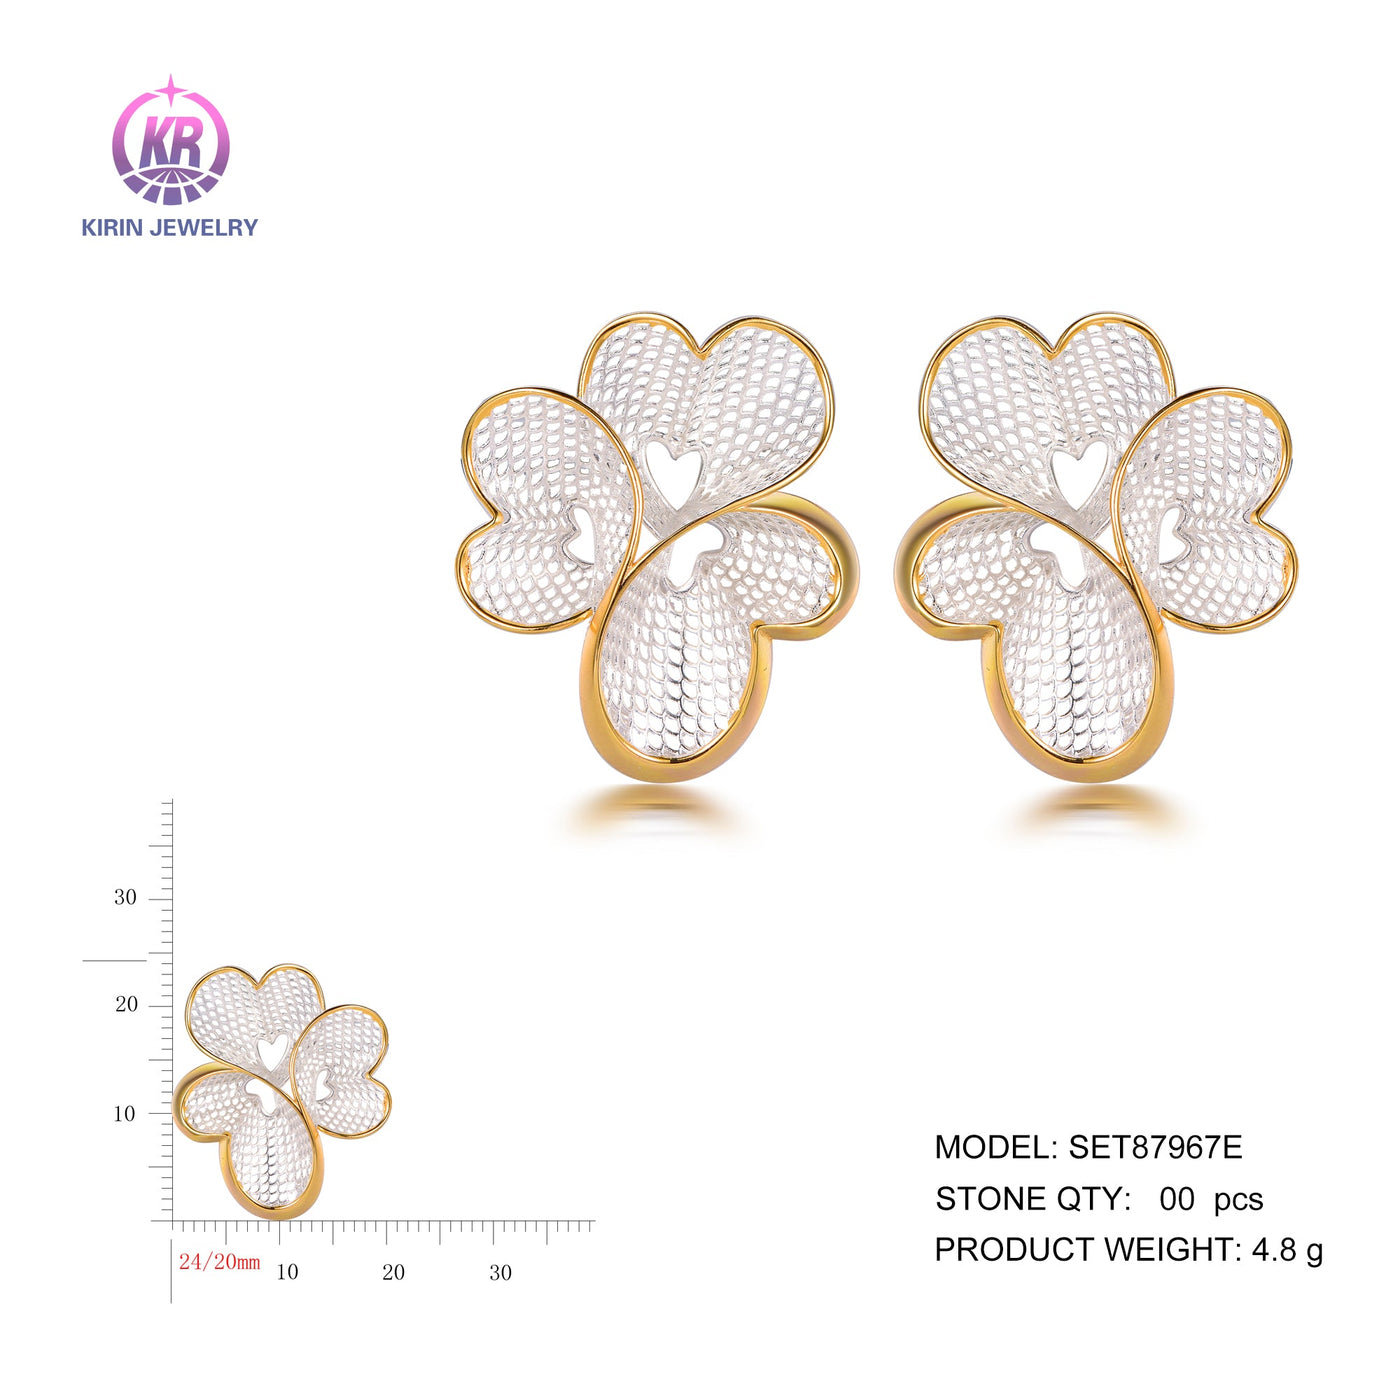 925 silver earrings with 2-tone plating rhodium and 14K gold SET87967E Kirin Jewelry